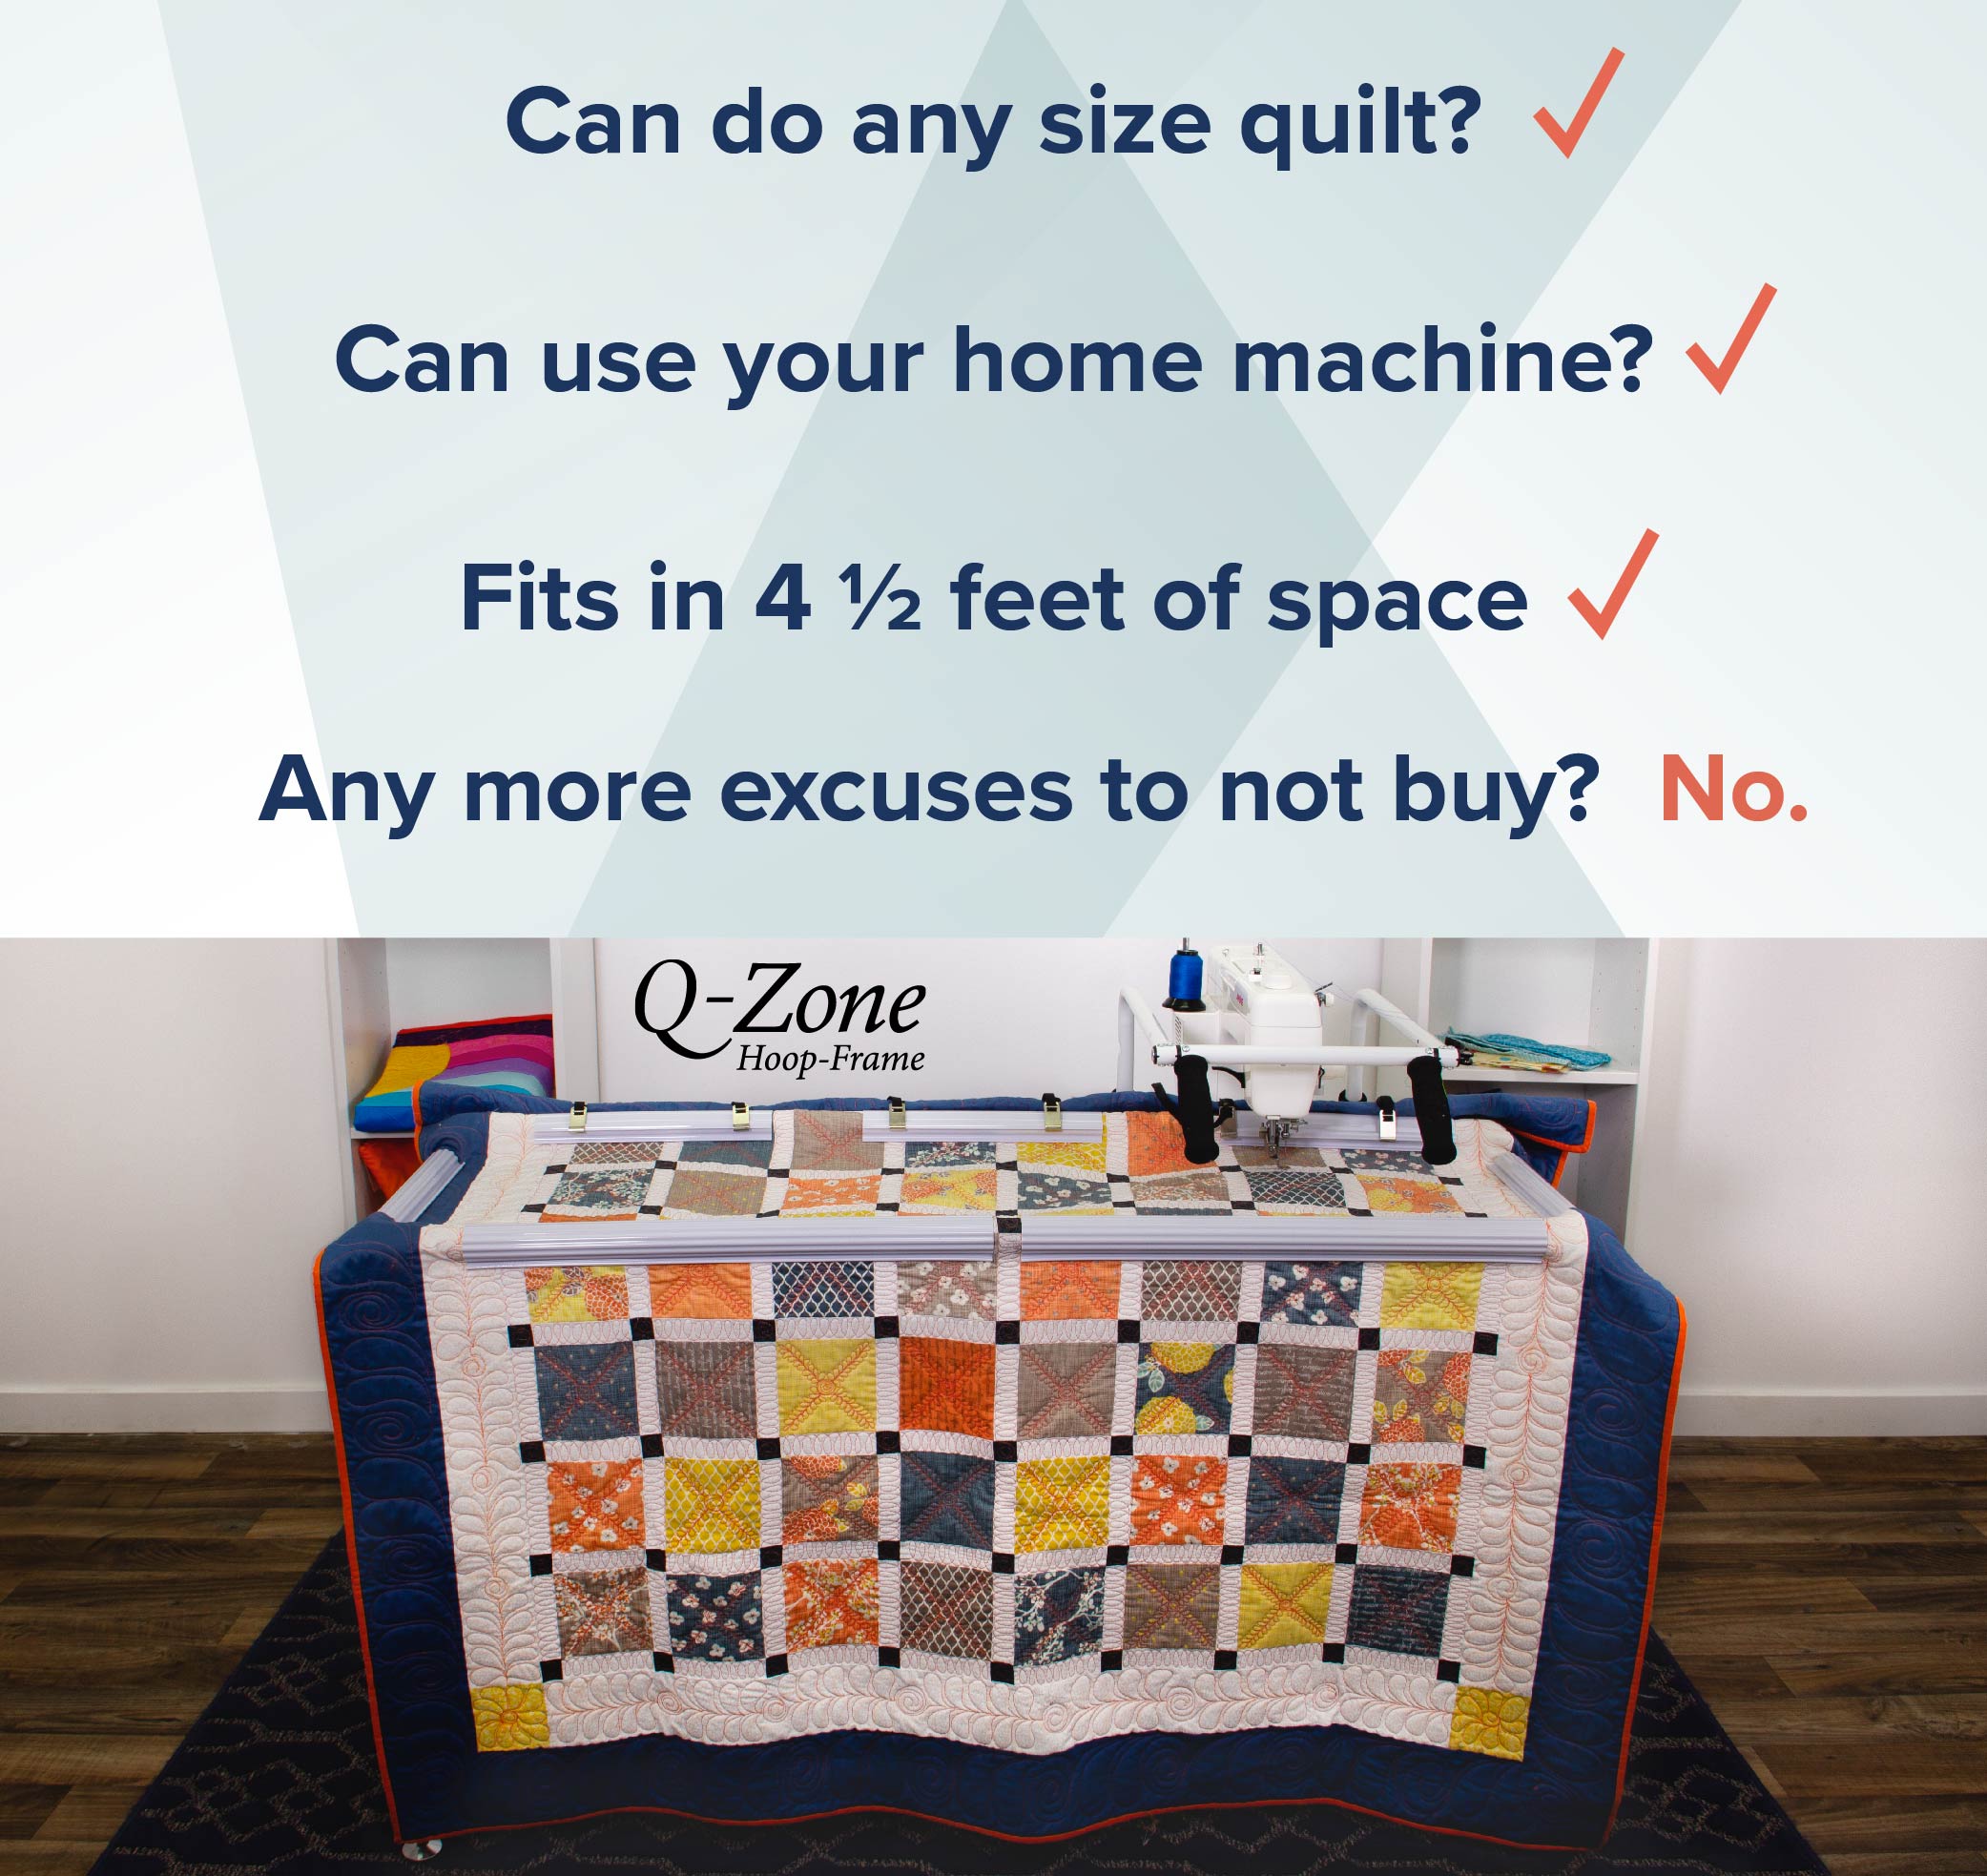 Can do any size quilt. Can use your home machine. Fits in 4.5 feet of space